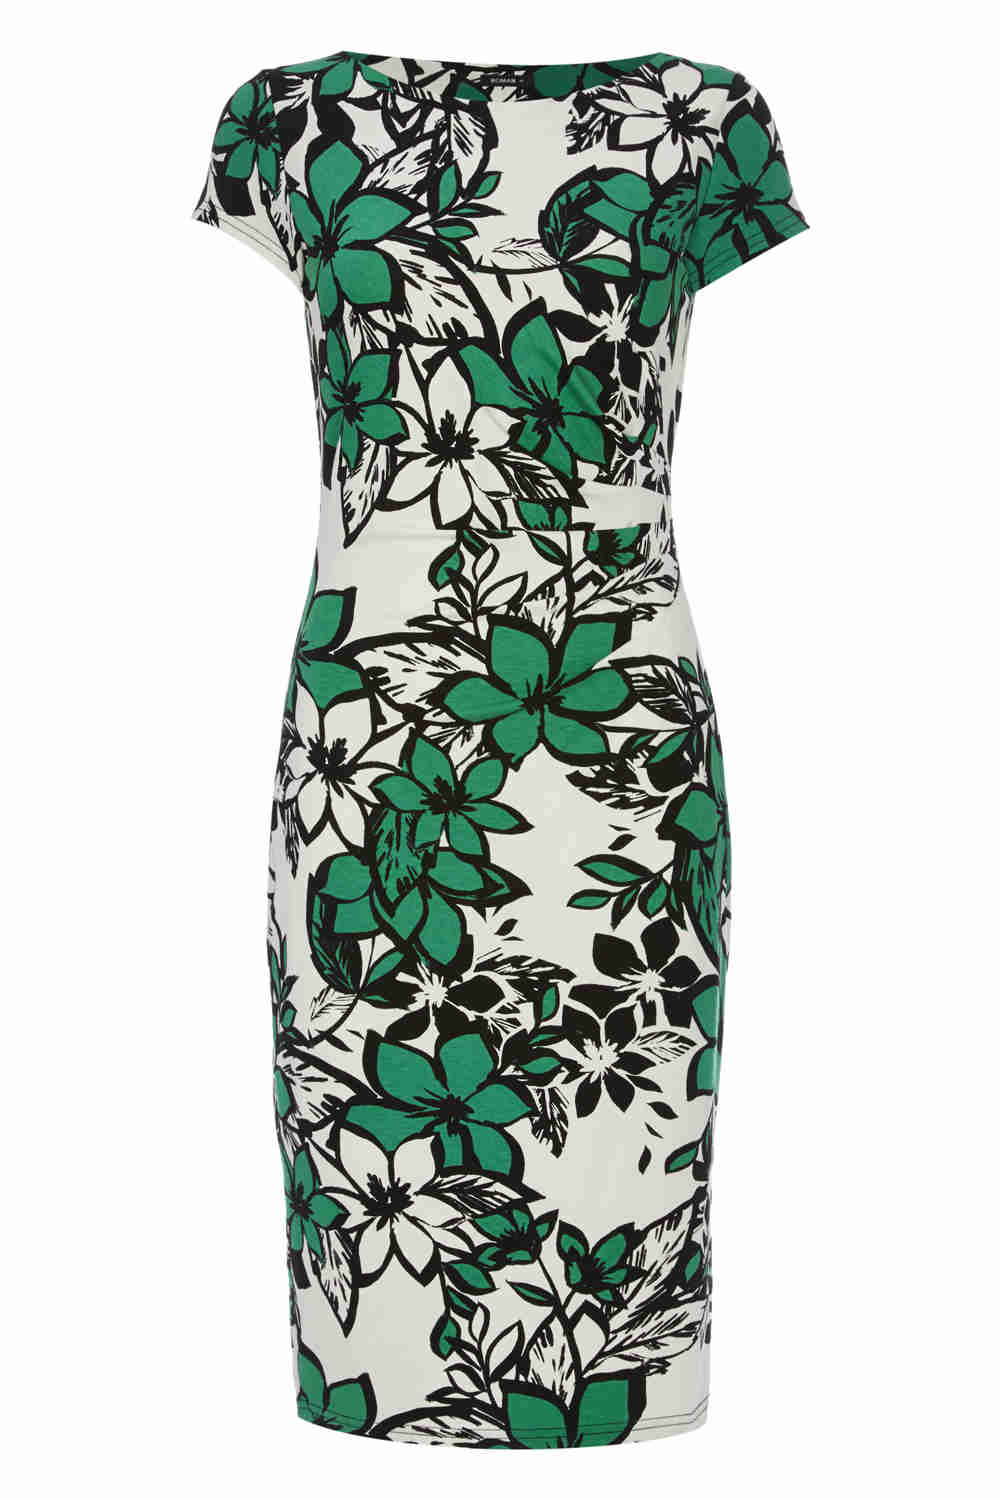 Jade Graphic Floral Print Jersey Dress , Image 4 of 5